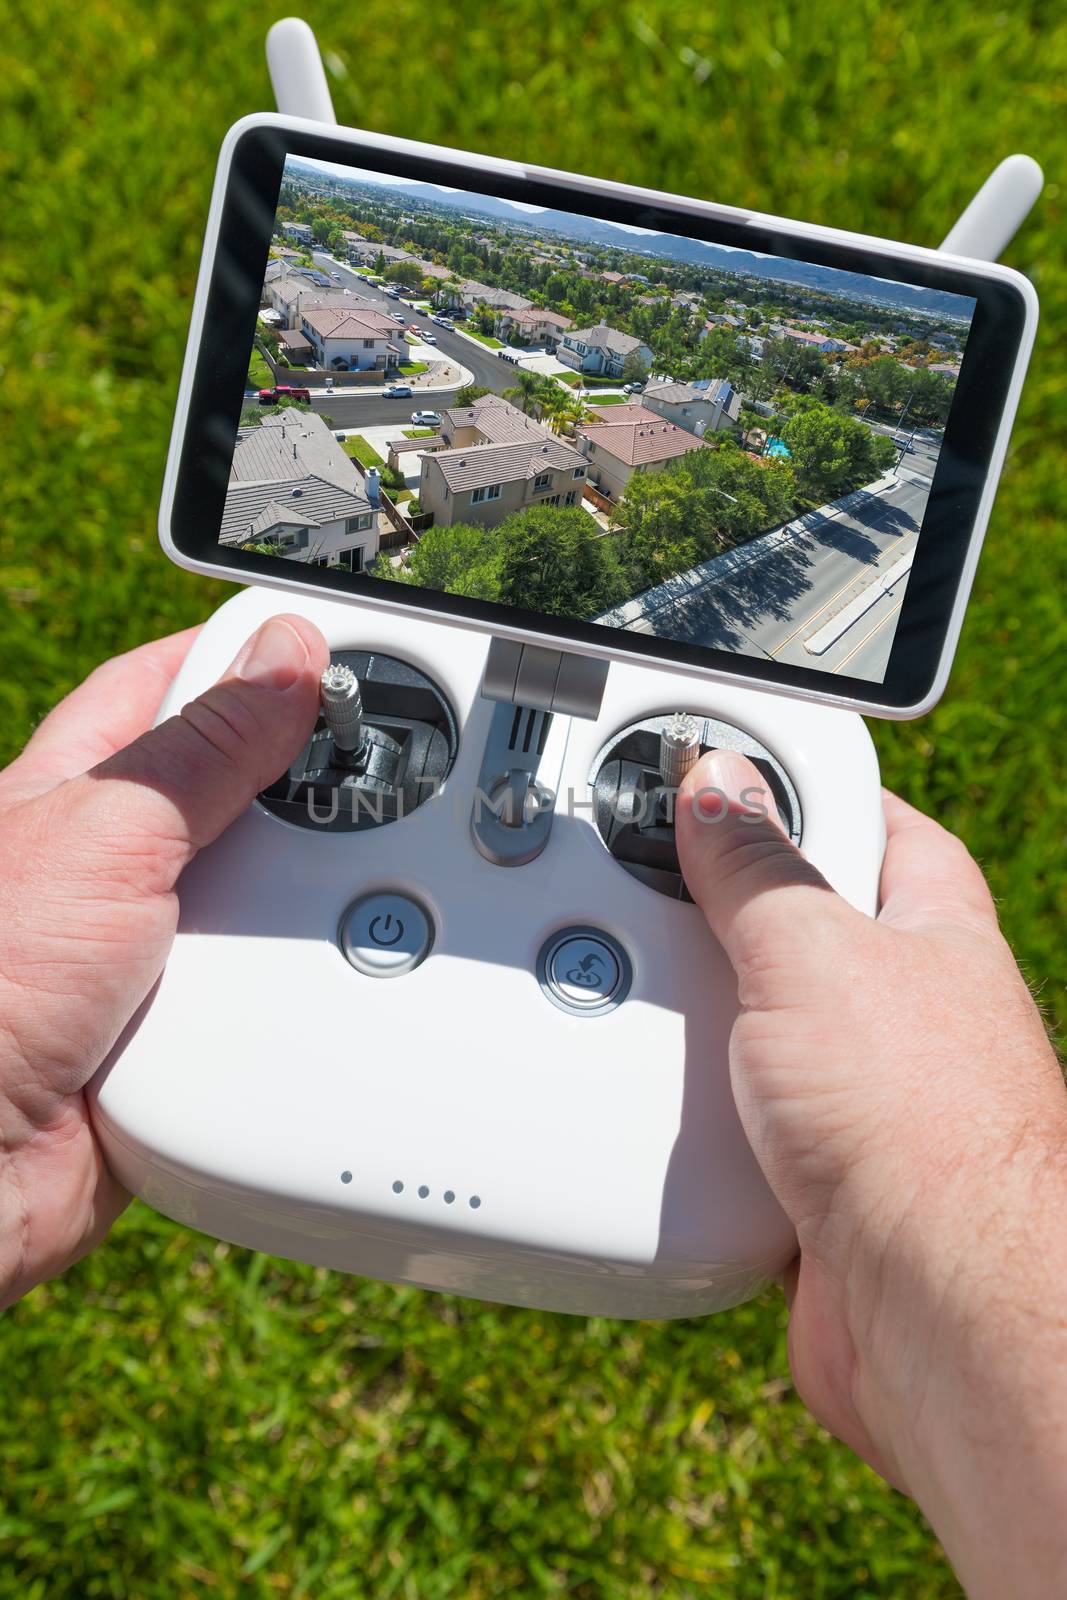 Hands Holding Drone Quadcopter Controller With Residential Homes on Screen. by Feverpitched